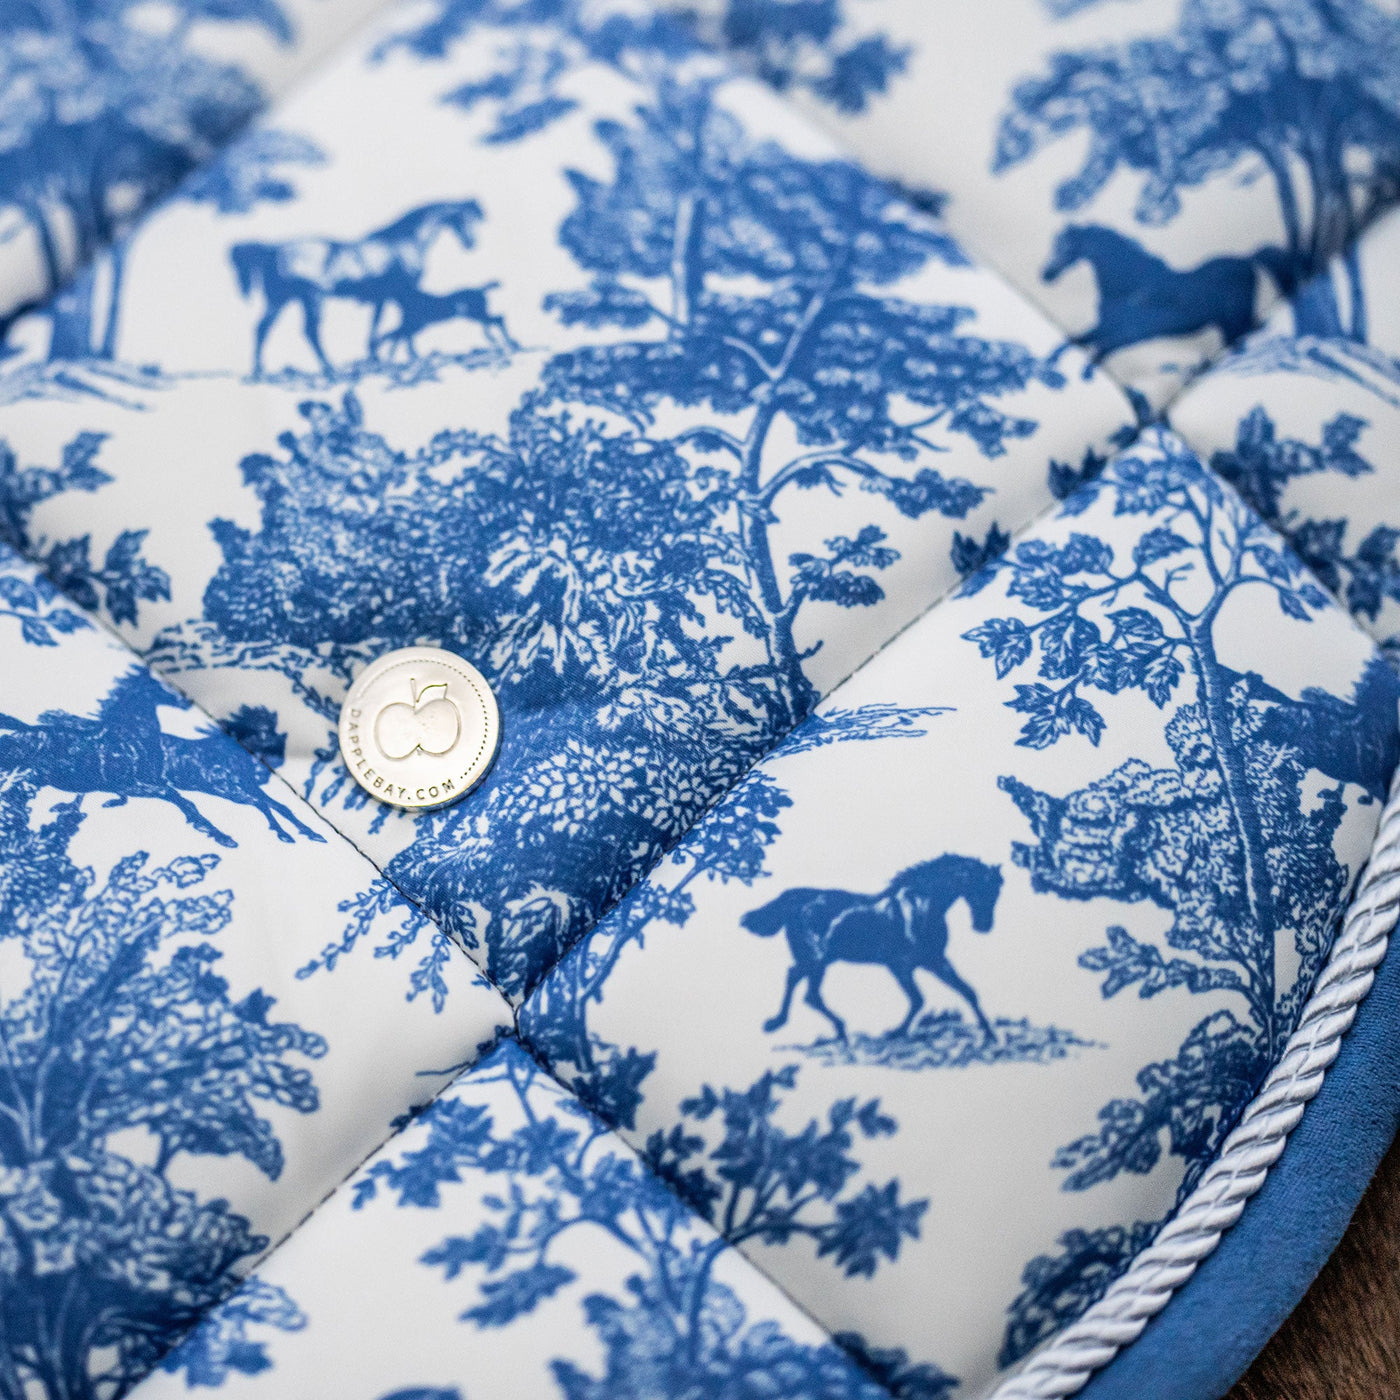 Equestrian Toile Jump Saddle Pad ~ LIMITED EDITION by Dapplebay